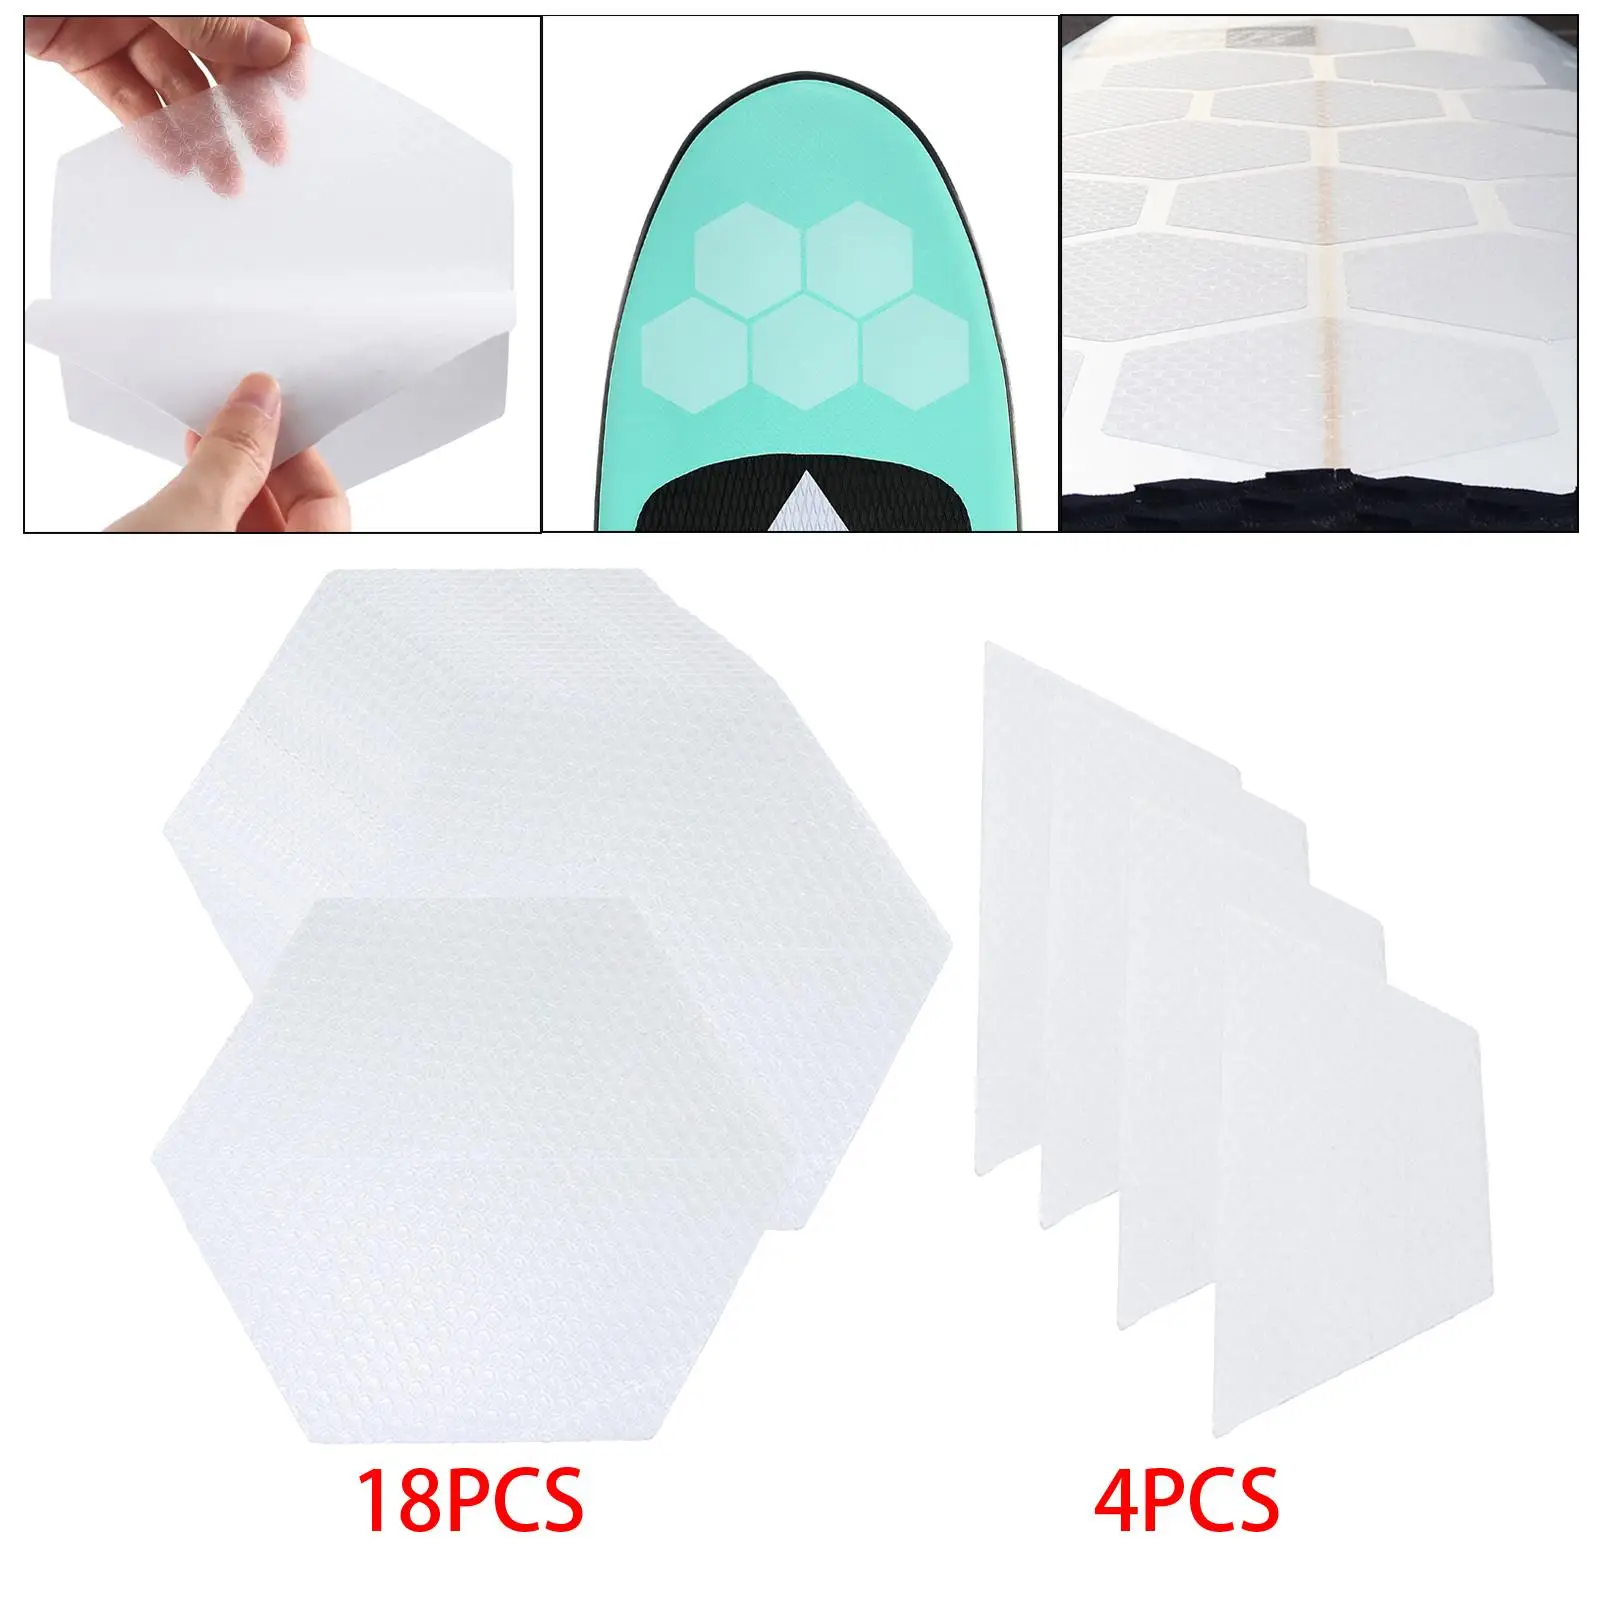 Hexagon Surfboard Traction Pads Foot Strap Surf Adhesive